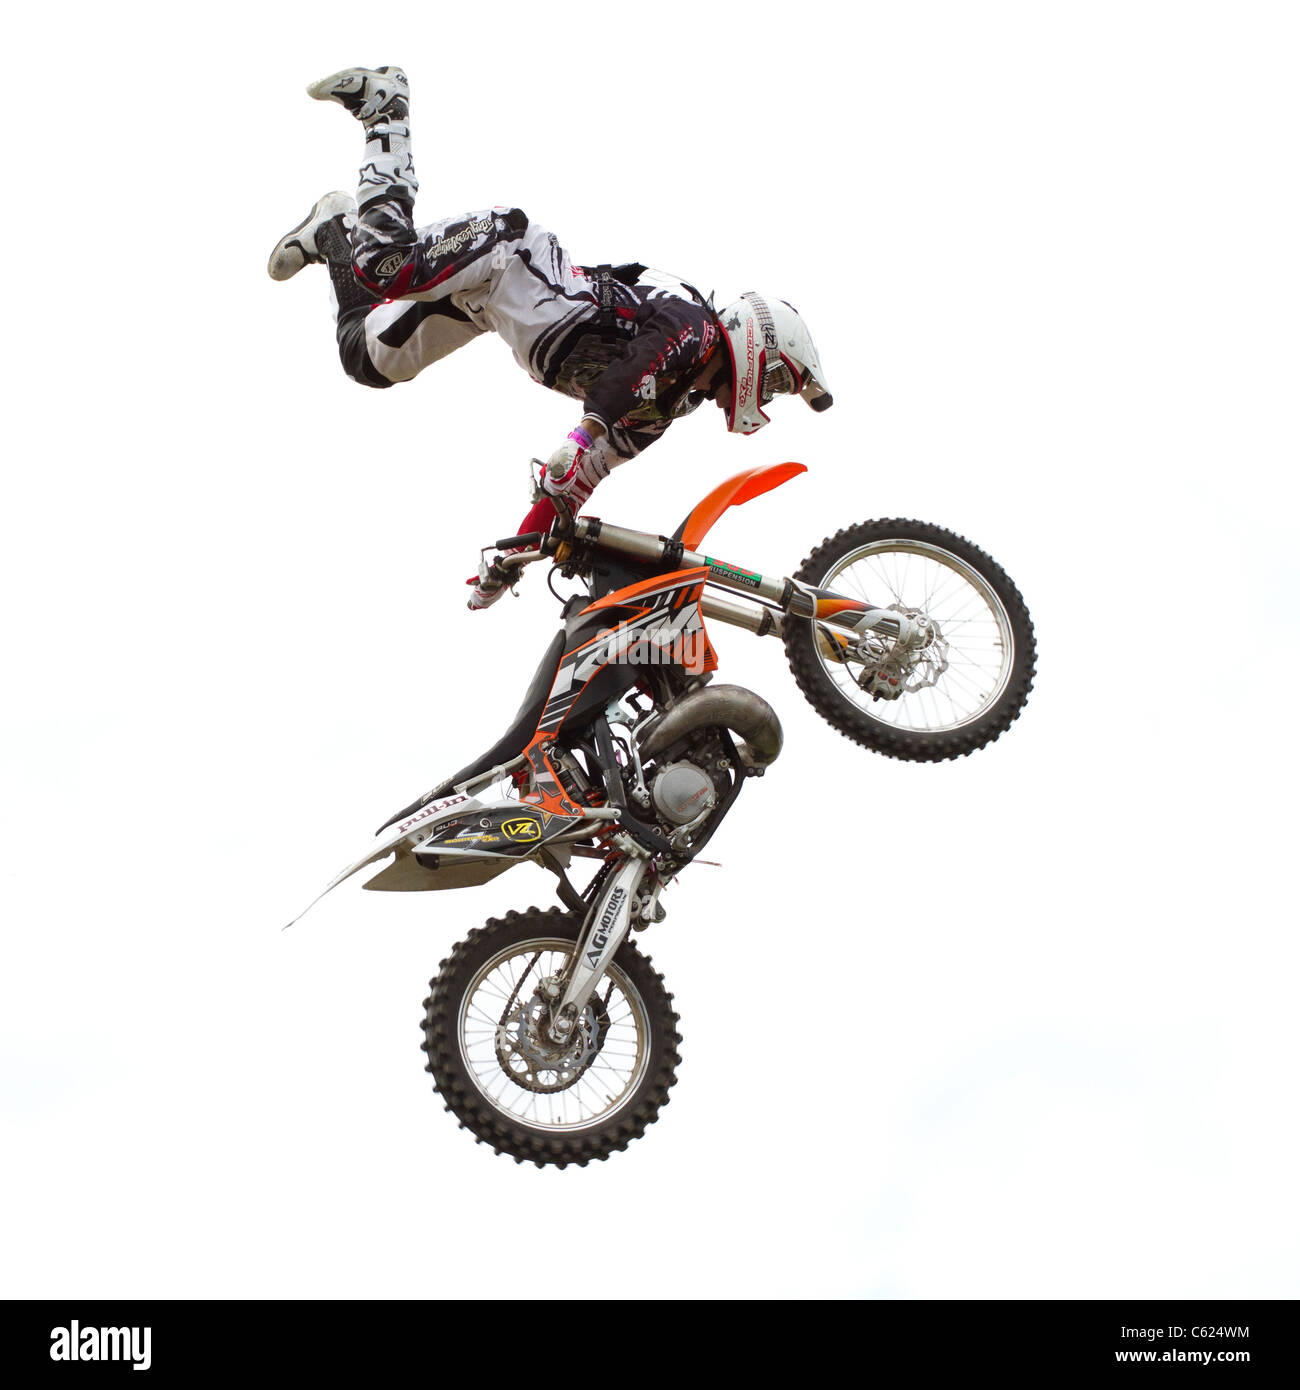 Freestyle Motocross action au goodwood festival of speed 2011, Sussex, England, UK. Banque D'Images